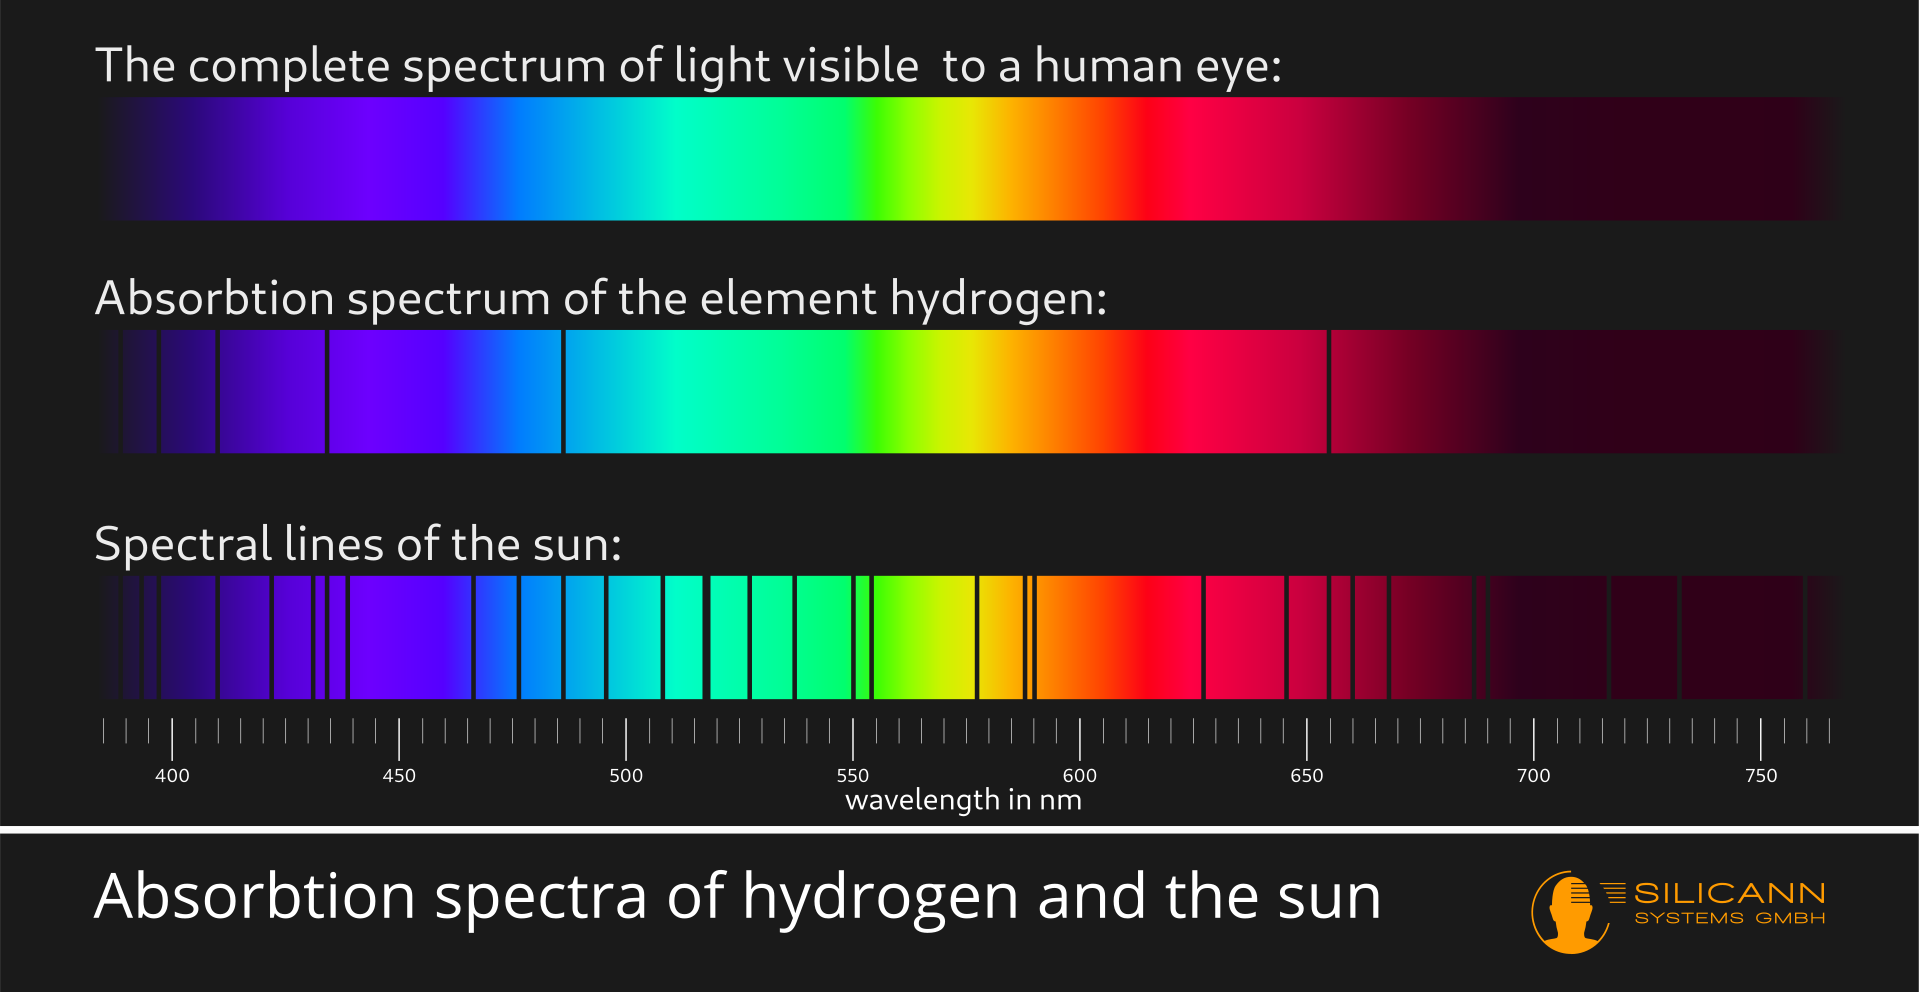 The difference between spectroscope, spectrometer and